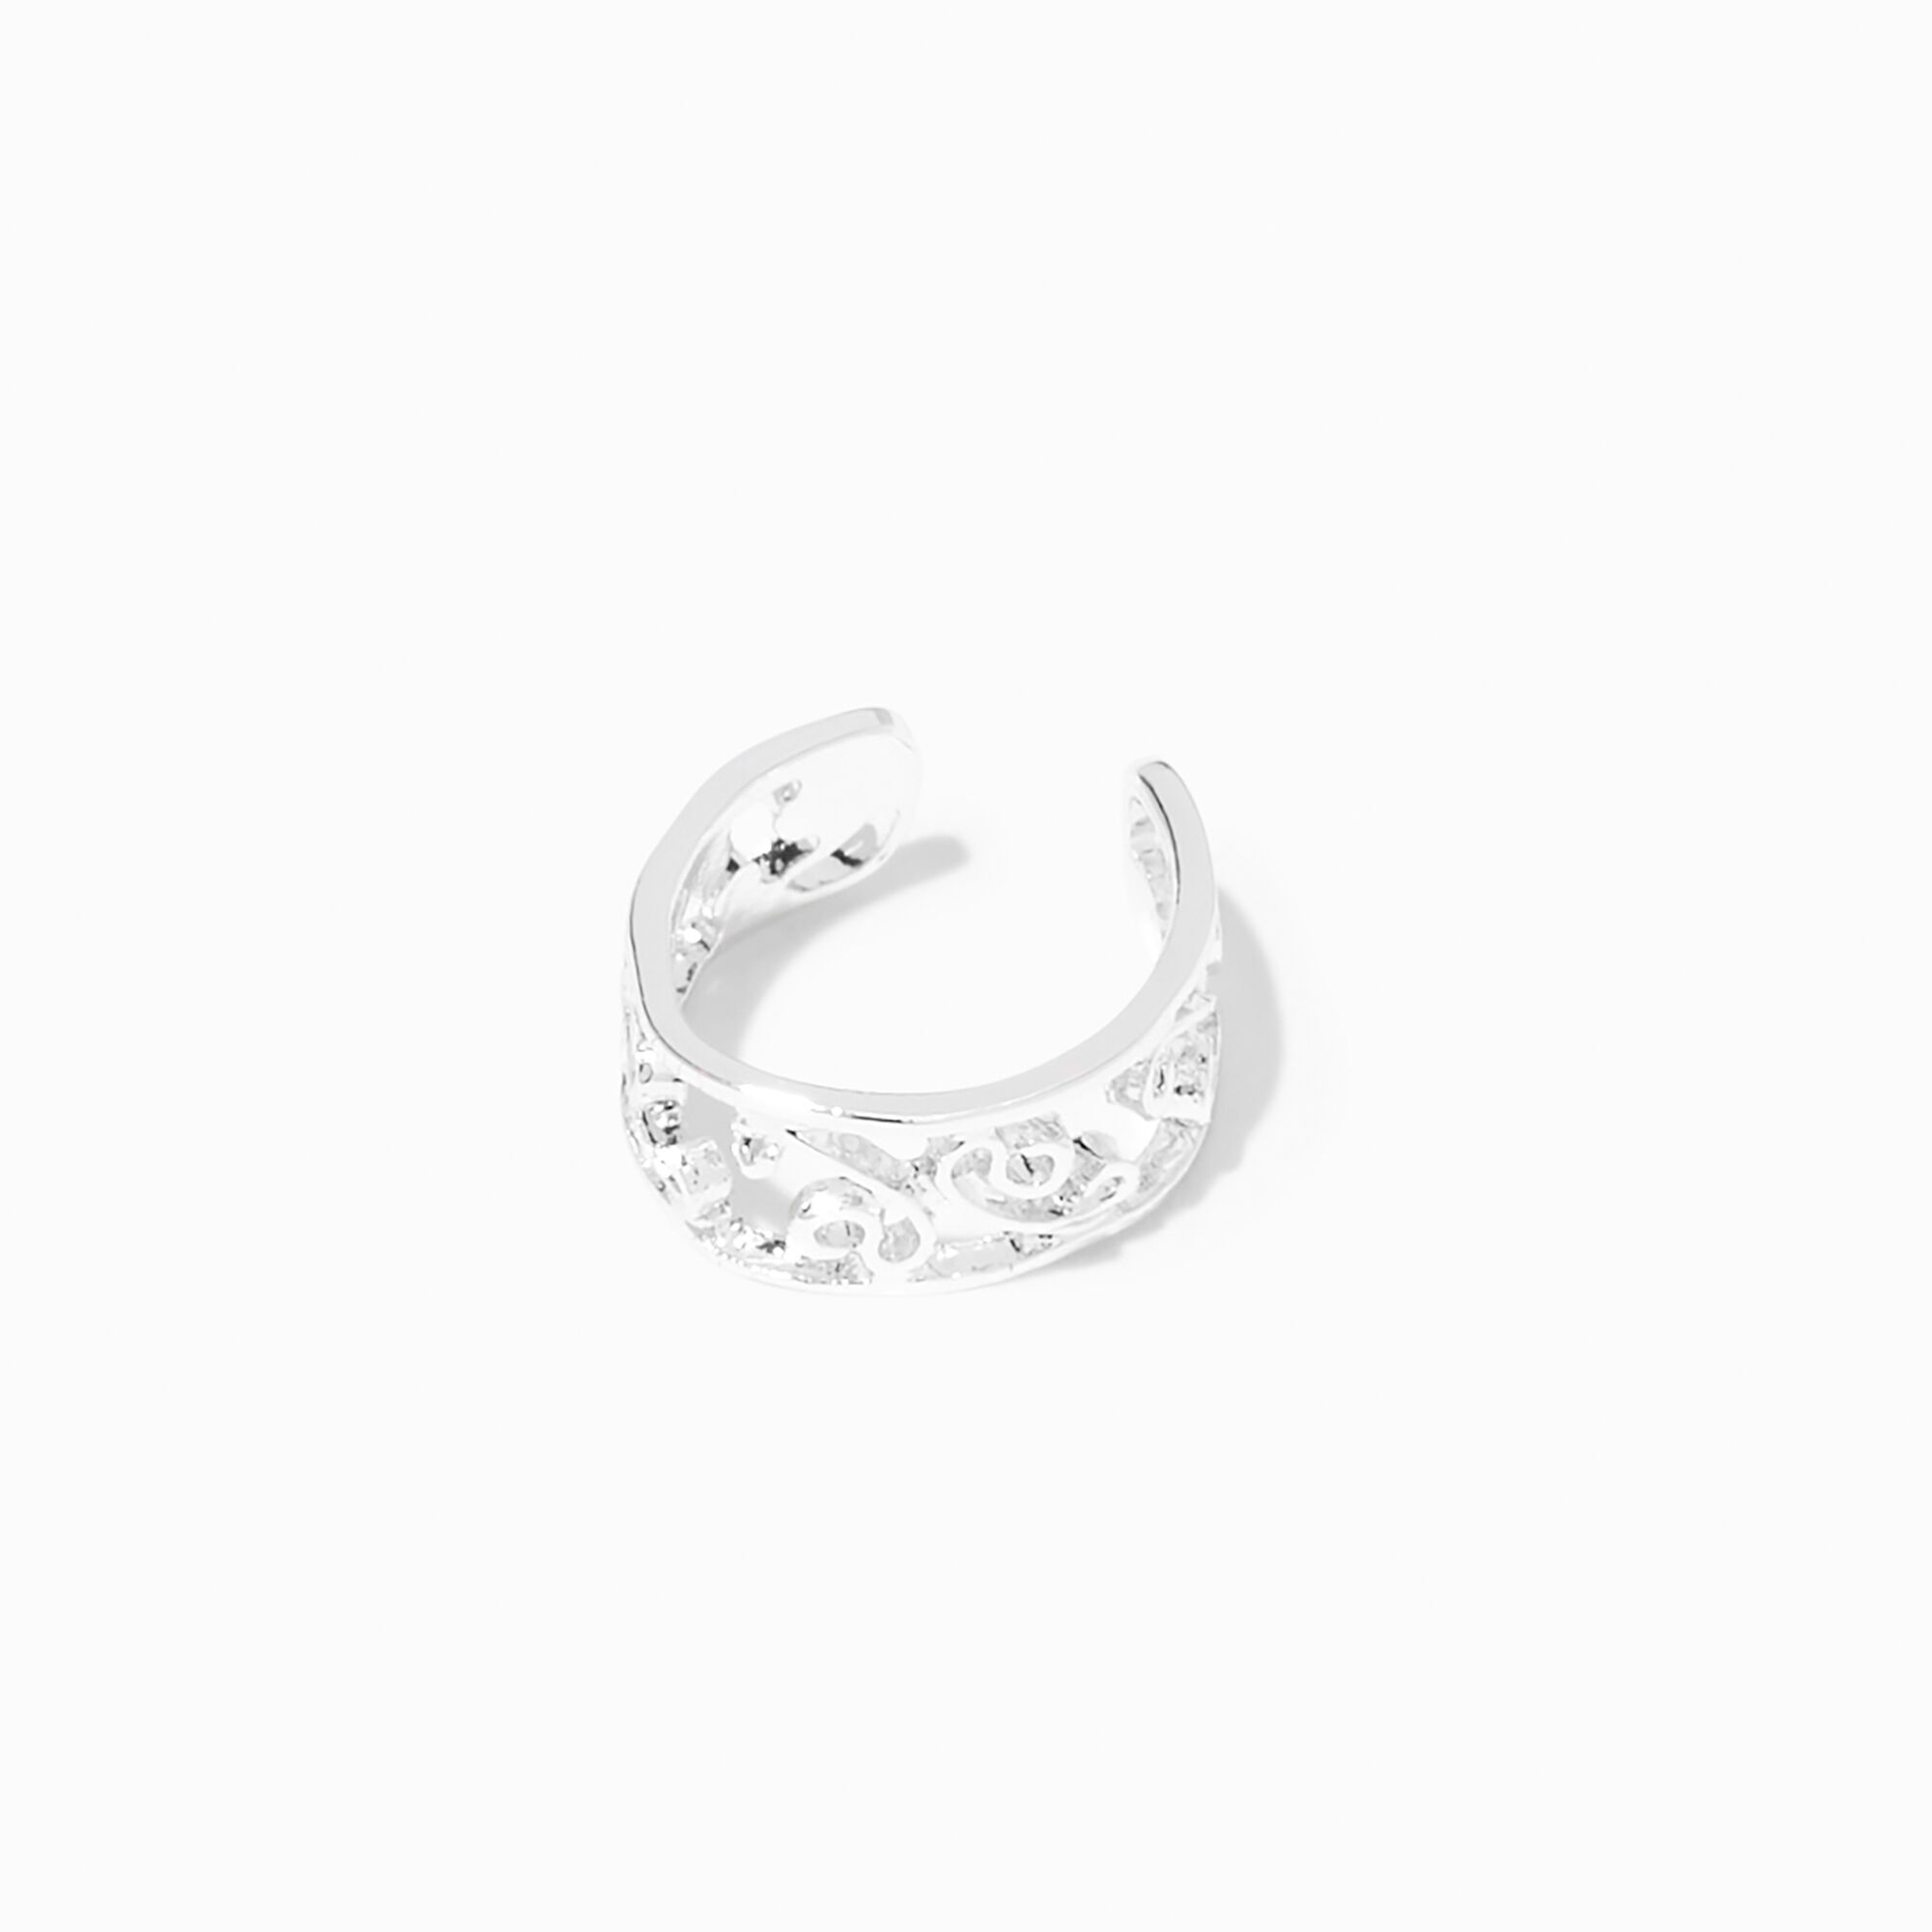 View Claires Tone Filigree Ear Cuff Silver information